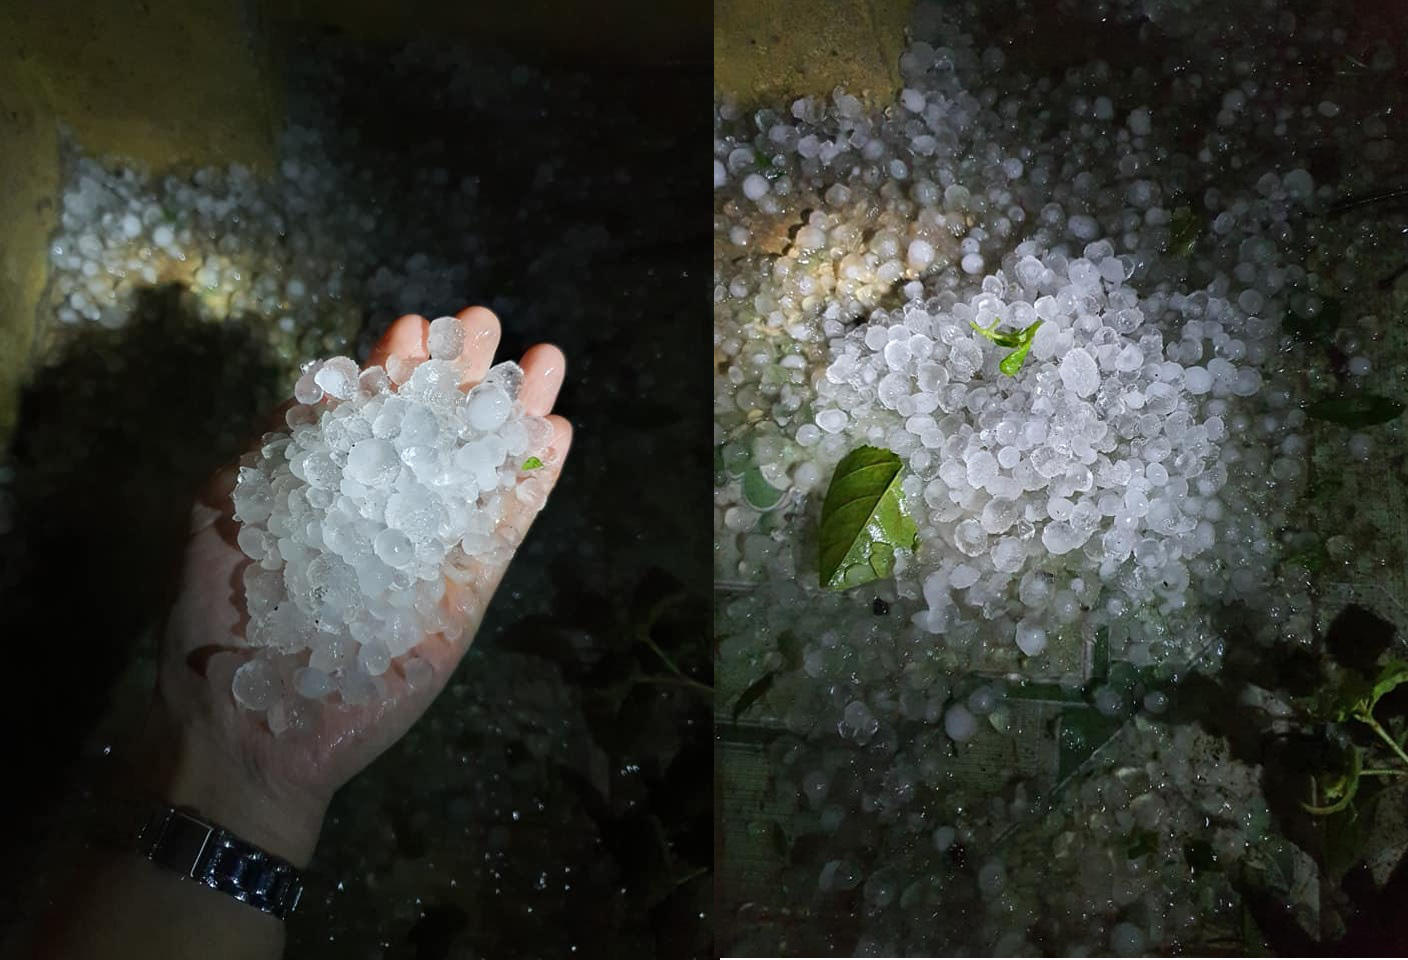 Hailstones are collected following a hailstorm in Yen Bai Province, Vietnam, March 2, 2020. Photo: yenbaitv.org.vn